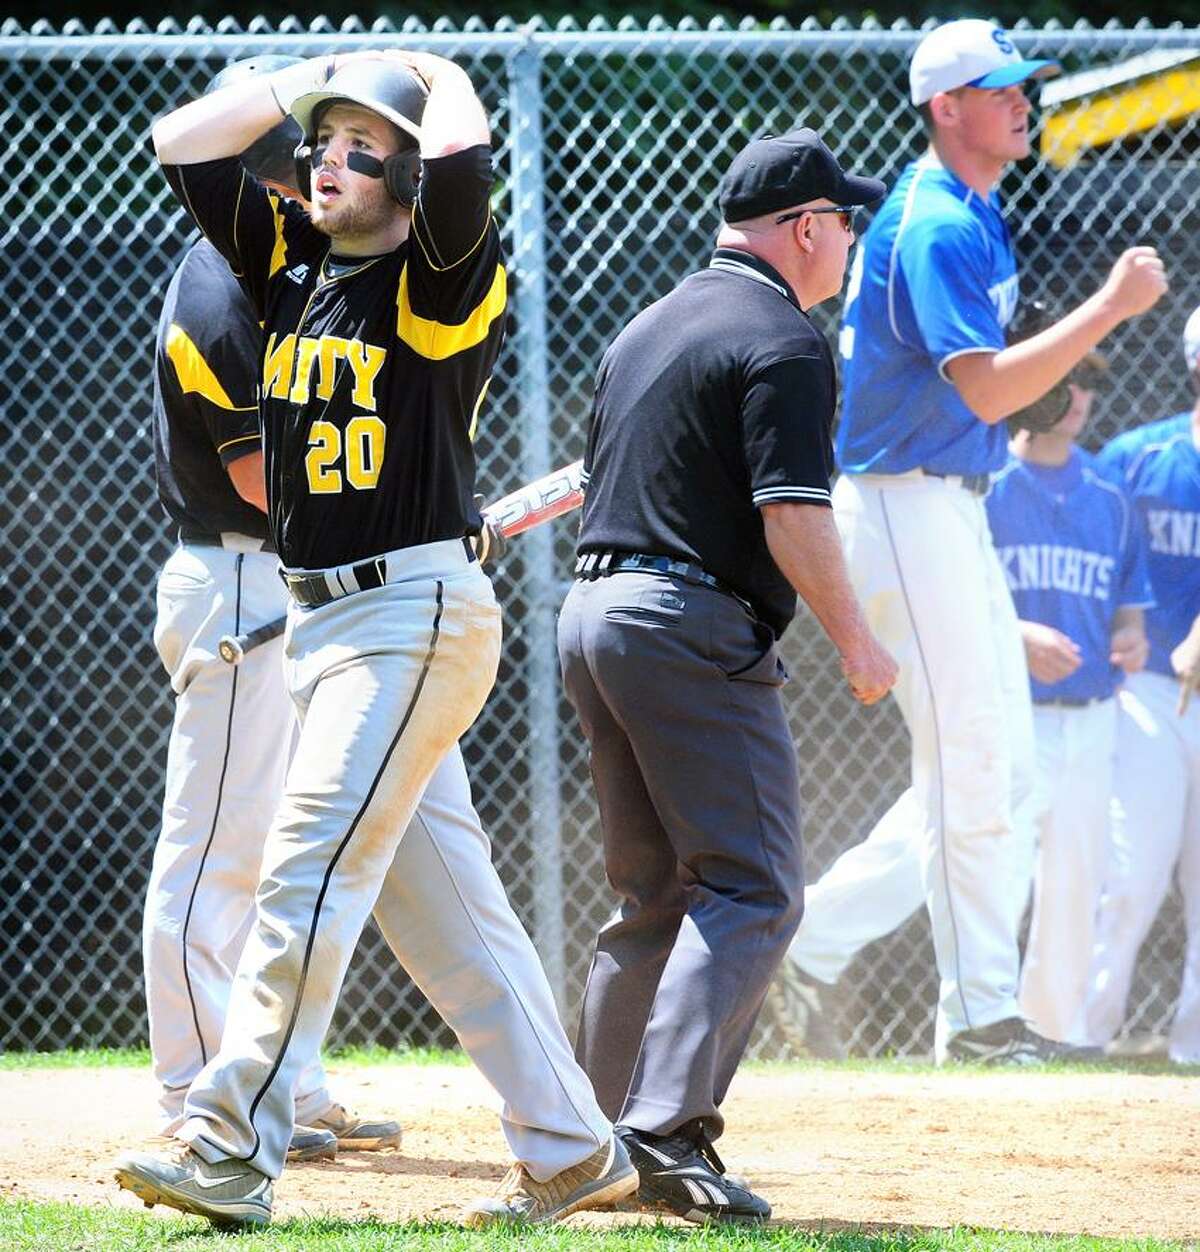 Paul Gusmano (left) of Amity reacts after being called out at the plate against Southington in the fourth inning on 6/3/2012. At right is Southington pitcher Justin Robarge.Photo by Arnold Gold/New Haven Register